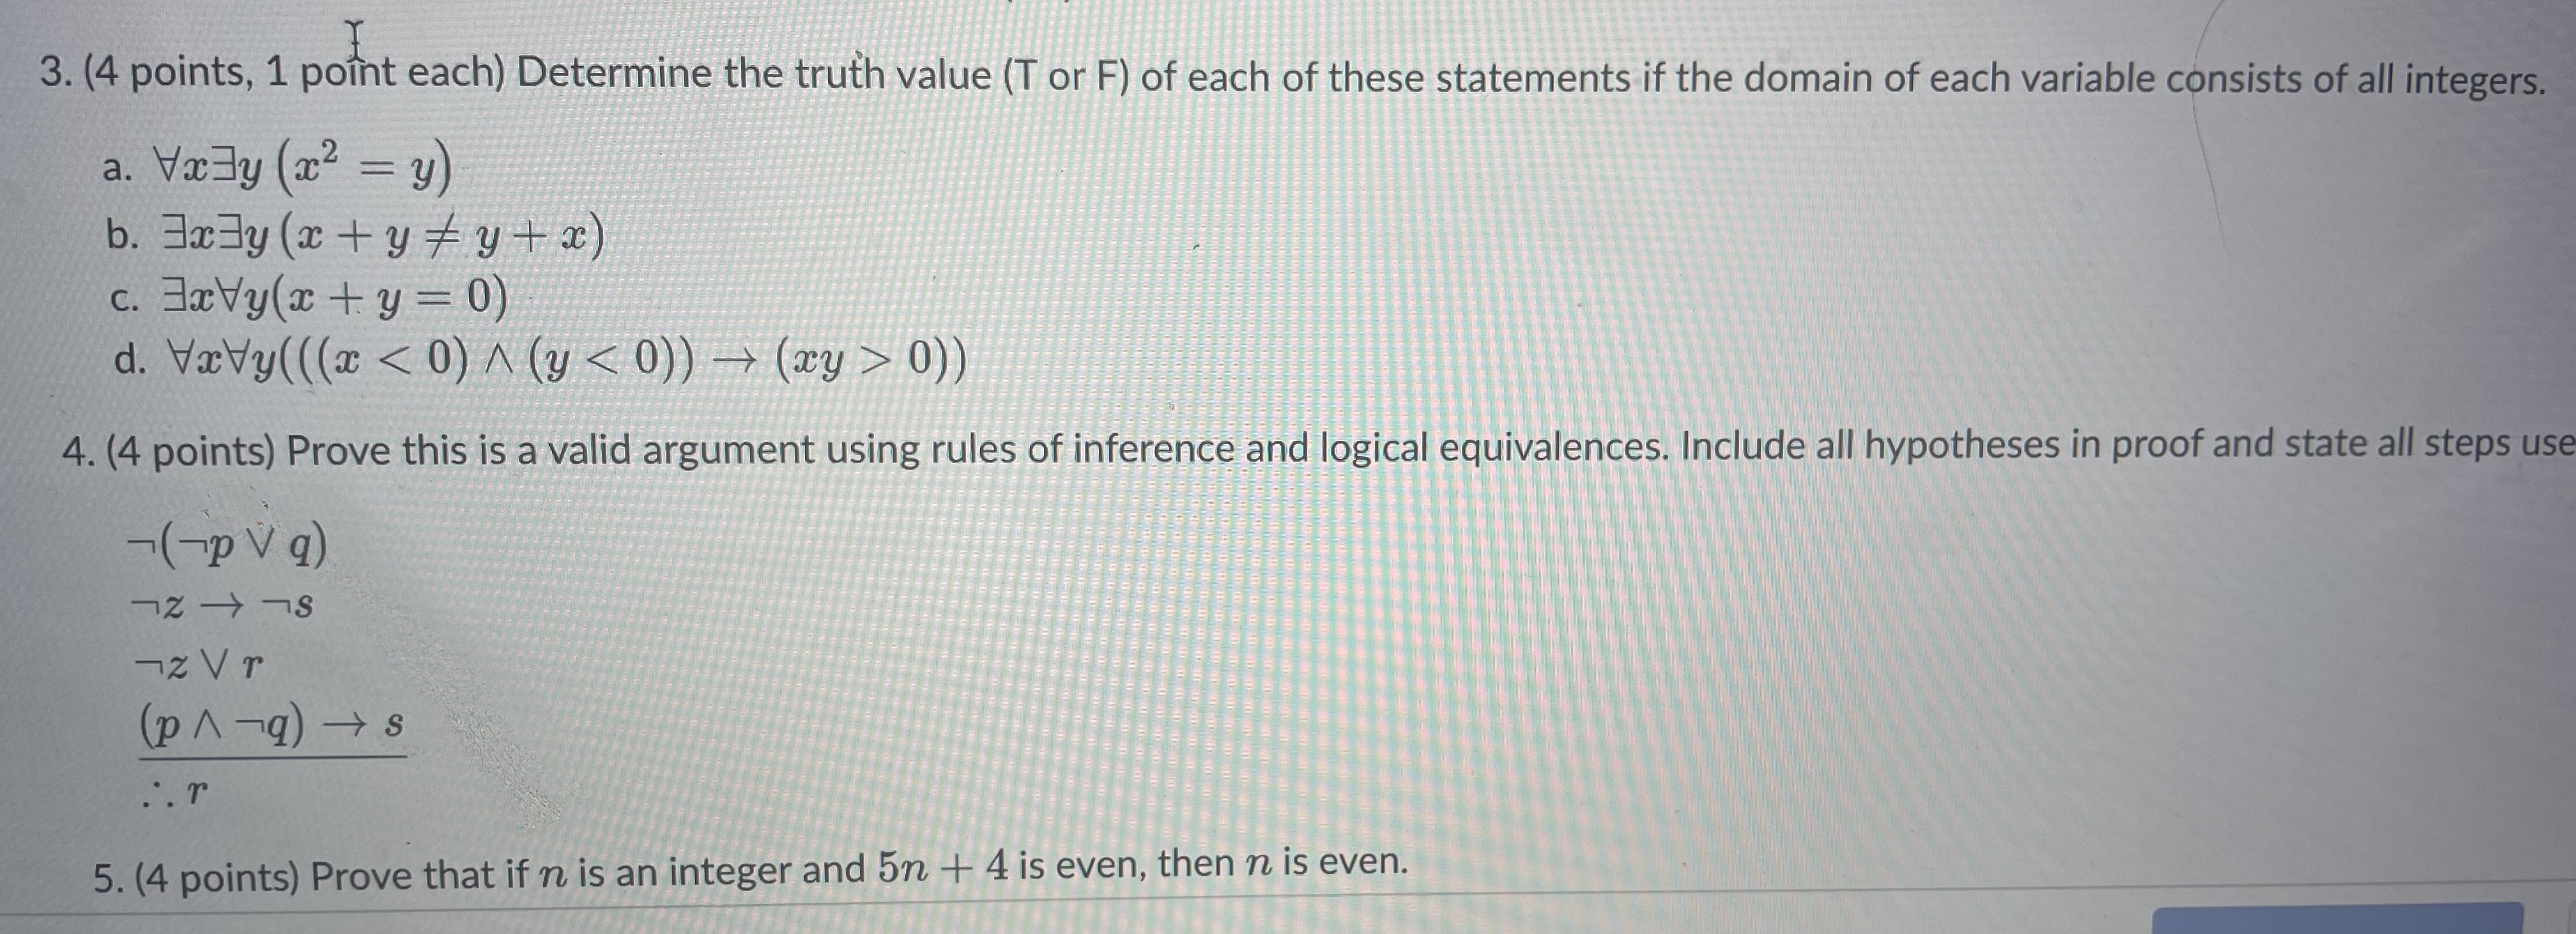 3. (4 points, 1 point each) Determine the truth value (T or F) of each of these statements if the domain of